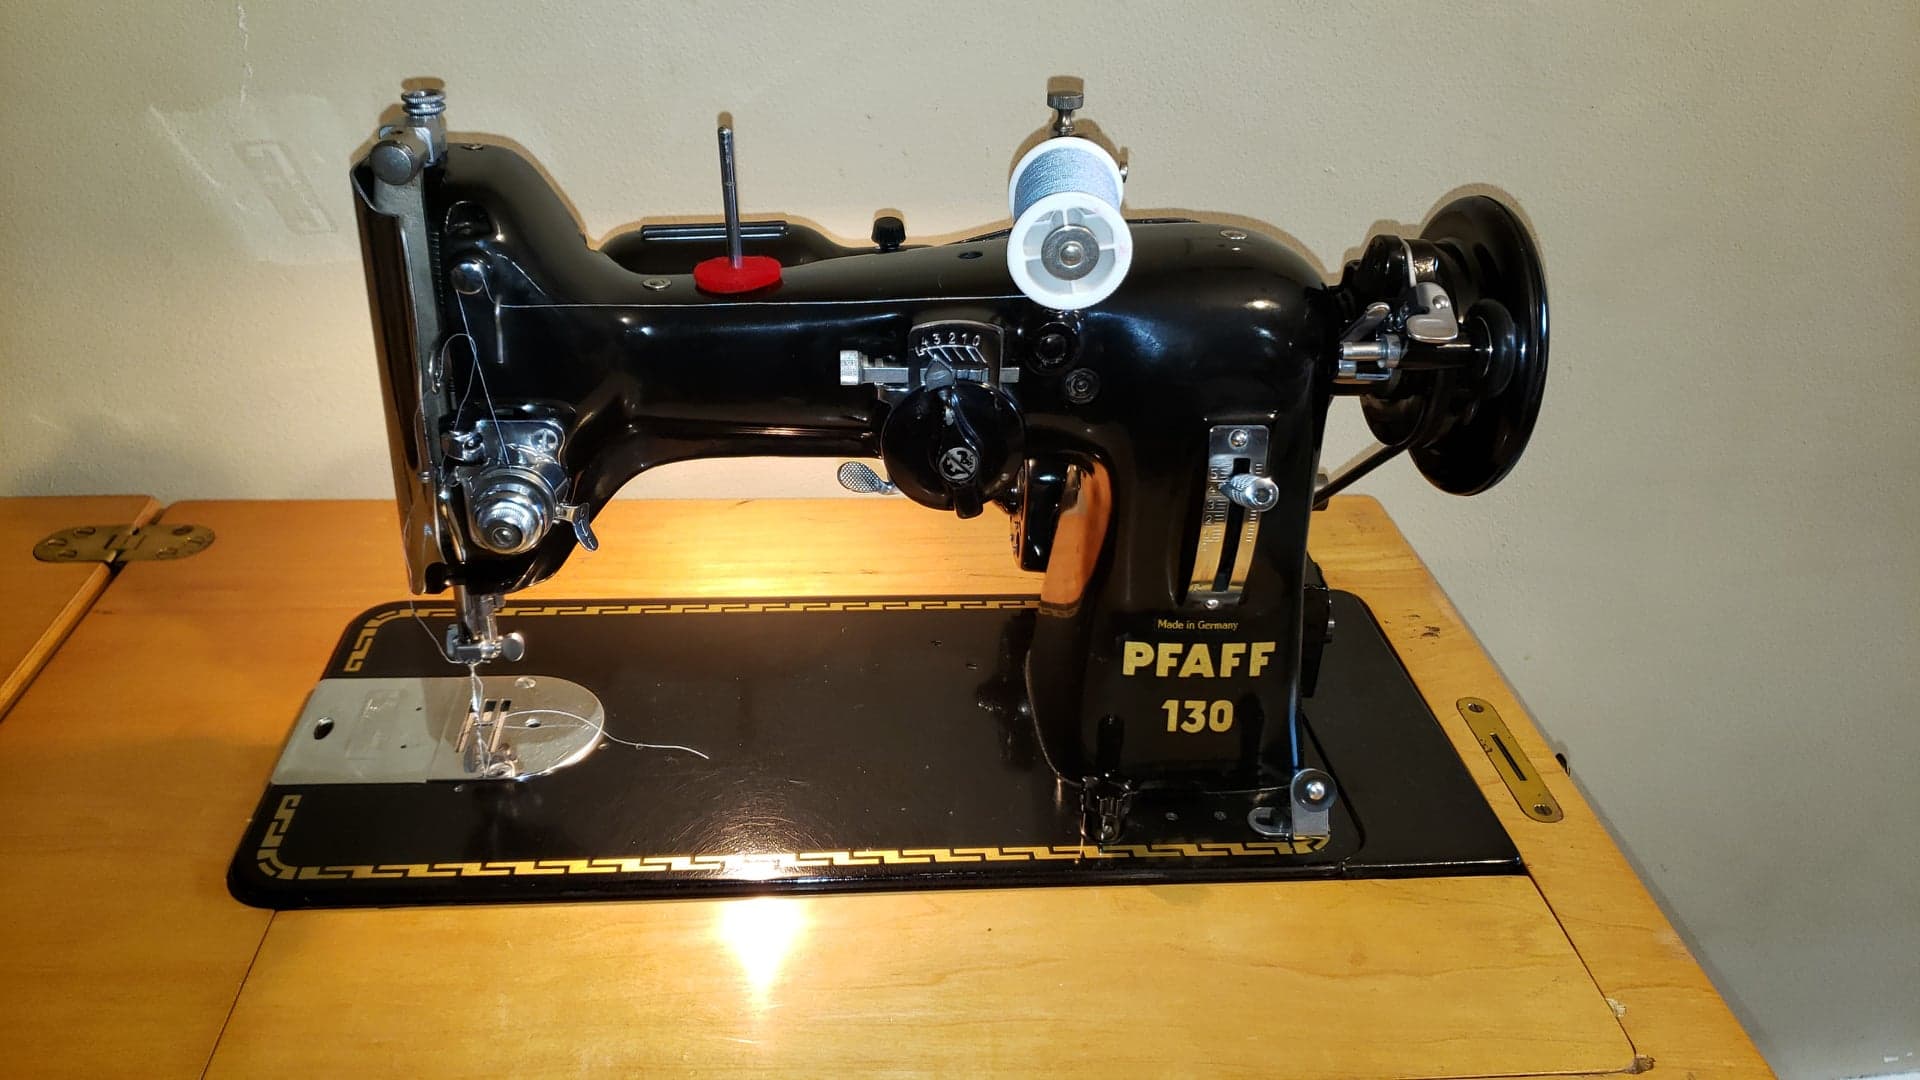 Sewing Machine Motor 250 WATTS  Pfaff 130,30  Complete With Foot Control 2.5 AMP 